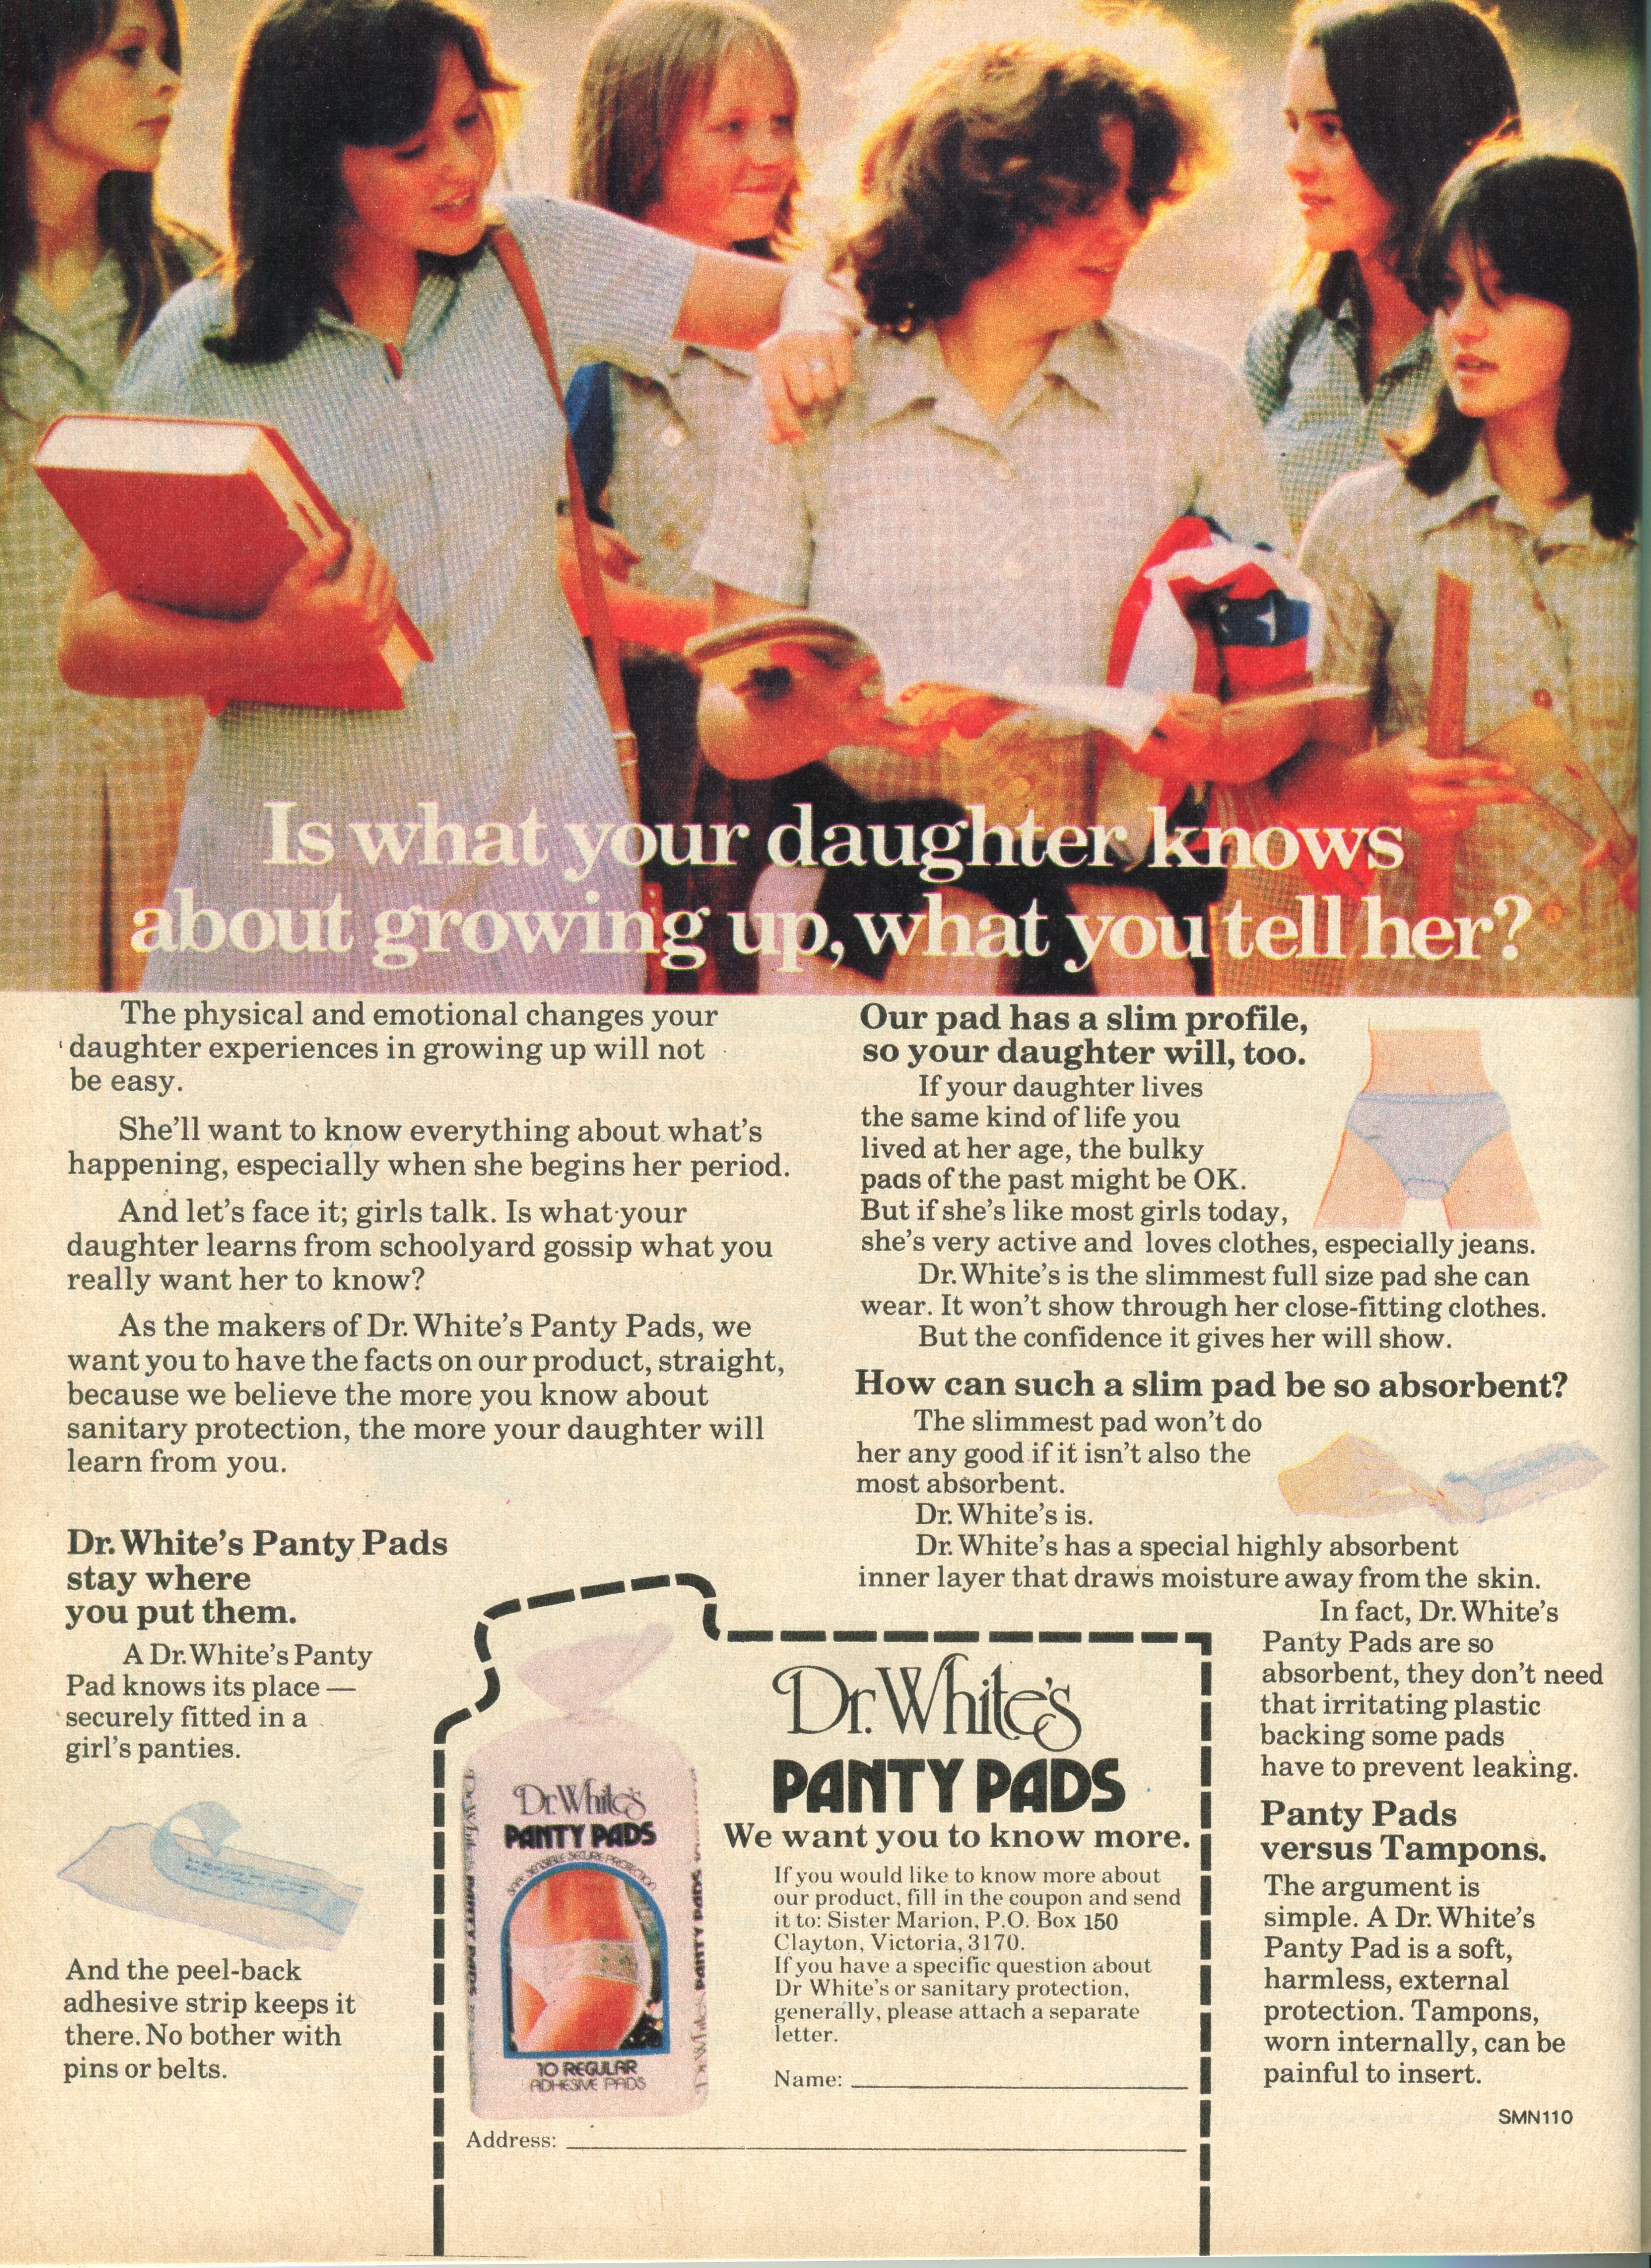 https://archive.org/download/1978-advertisement-for-dr.-whites-panty-pads/1978%20advertisement%20for%20Dr.%20White's%20Panty%20Pads.jpg